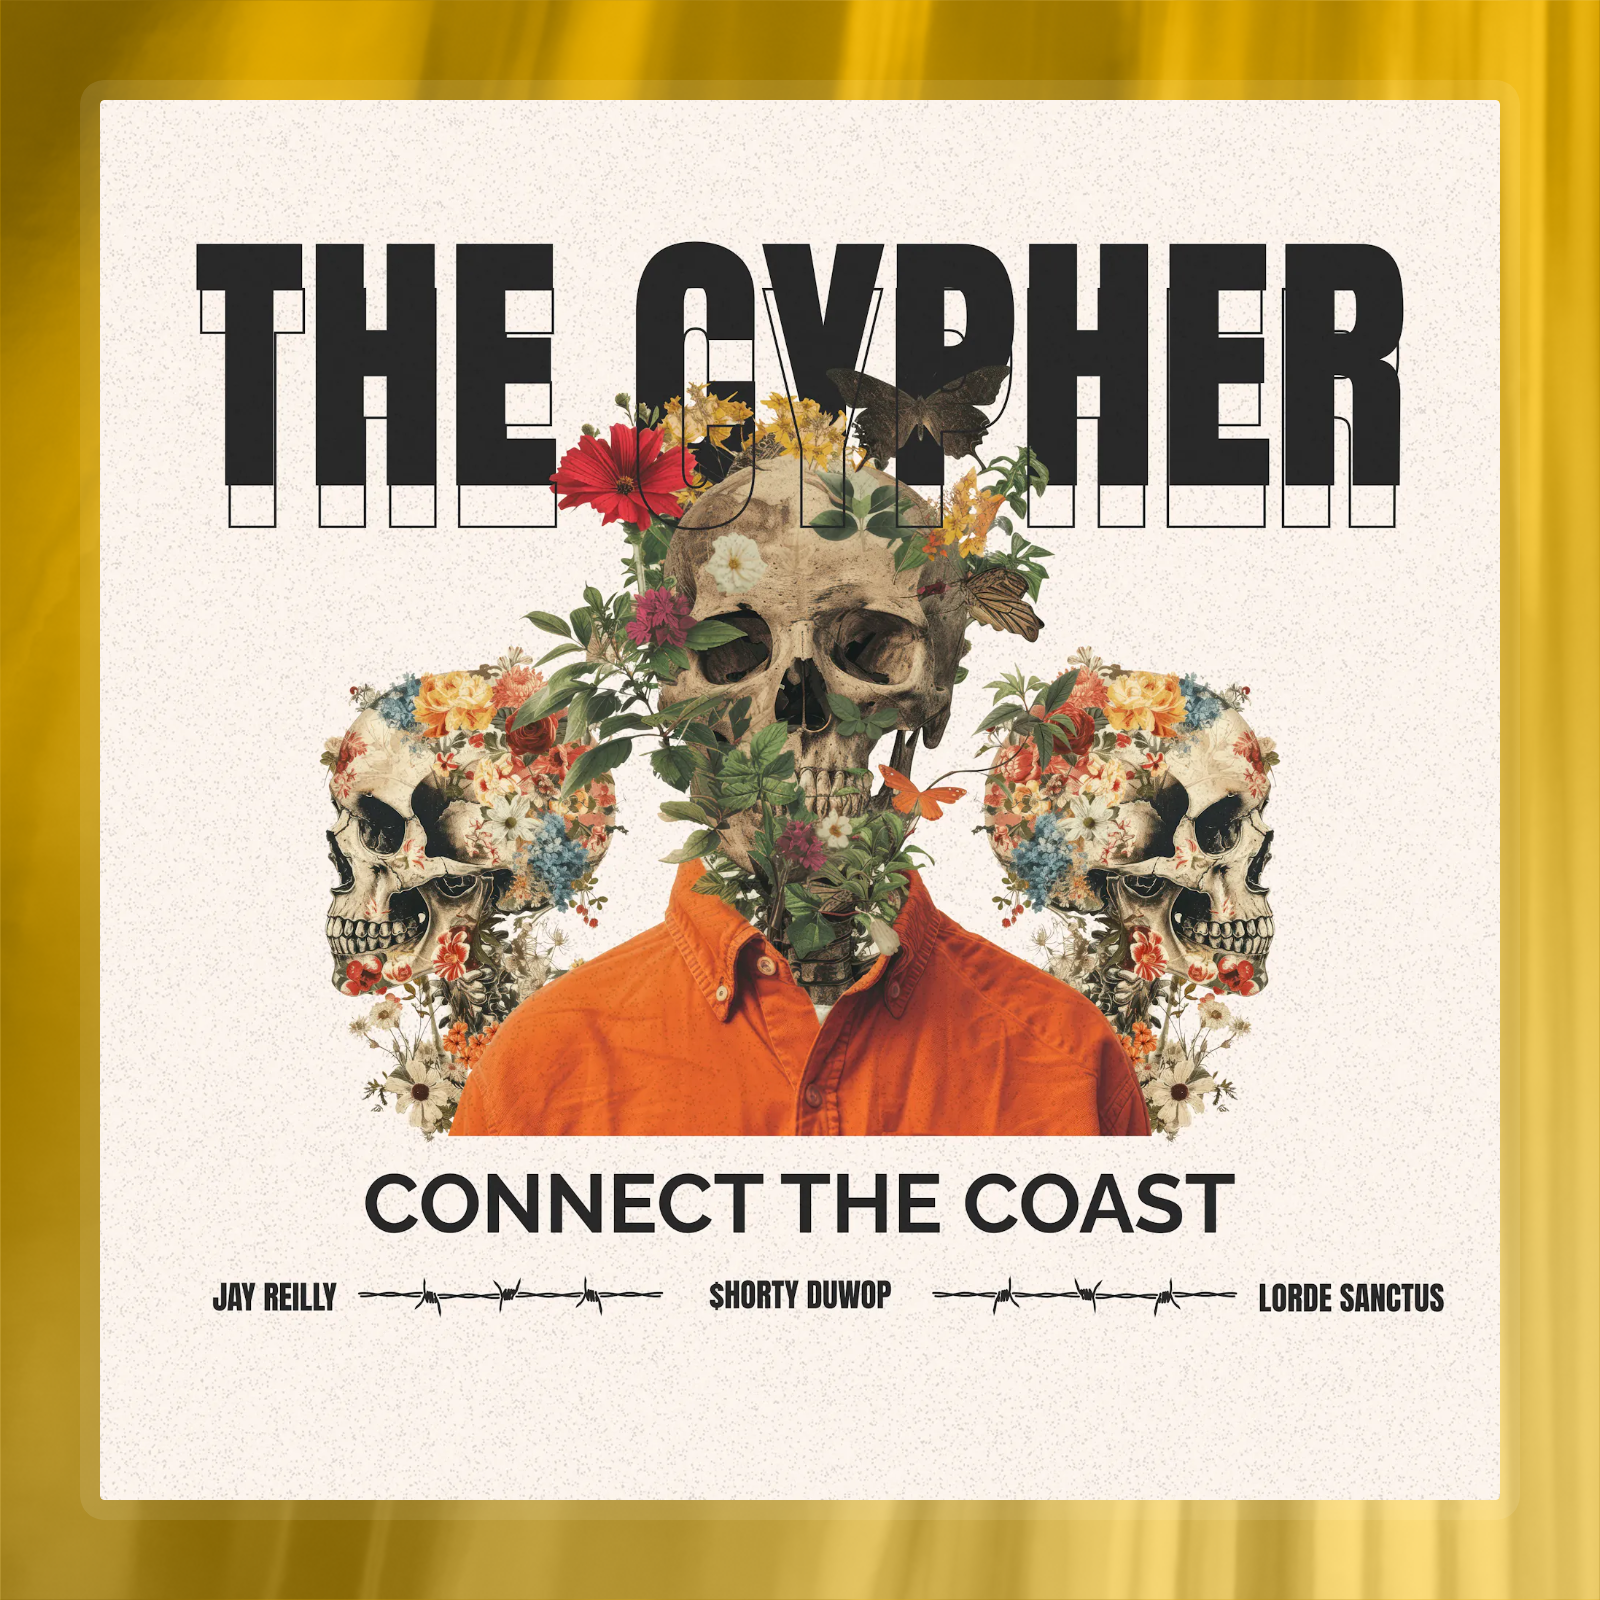 The Cypher feat. Jay Reilly,  $horty Duwop and Lorde Sanctus